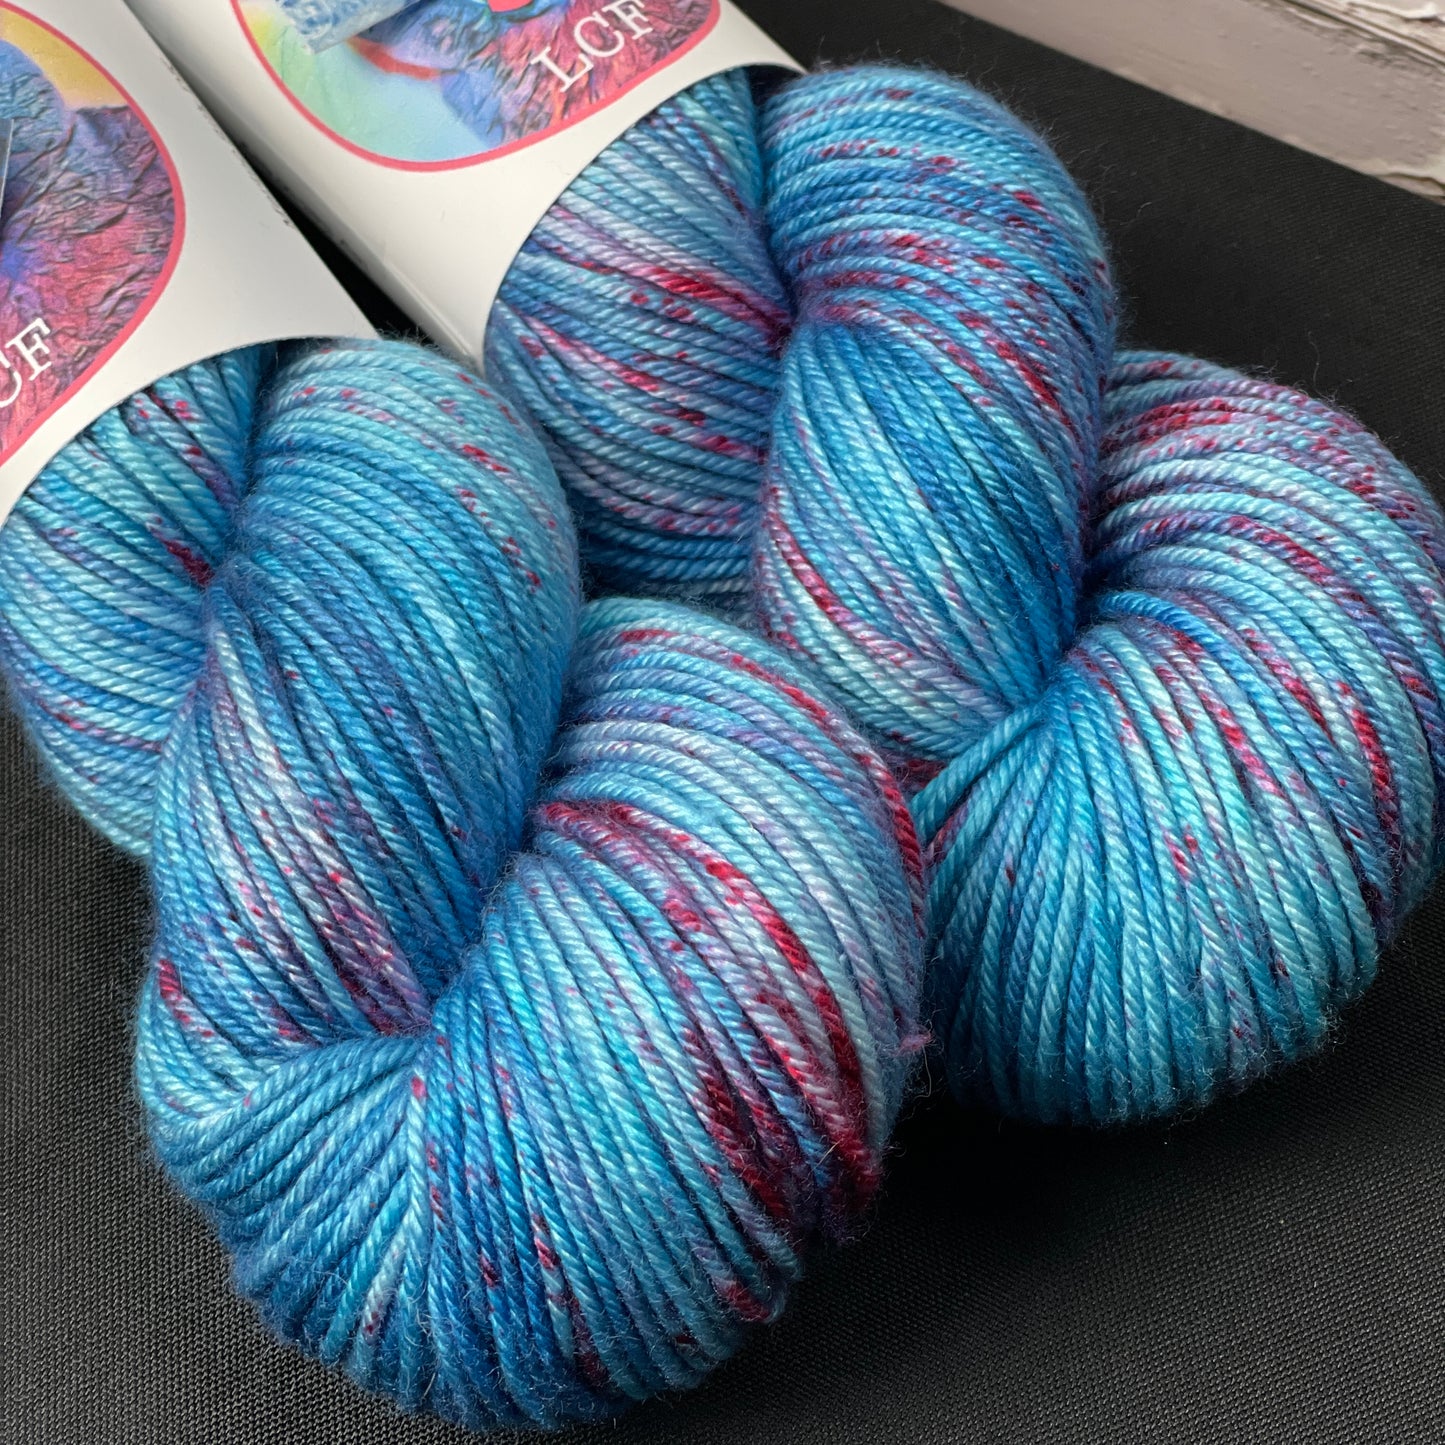 "Pablo" on Various Yarn Bases